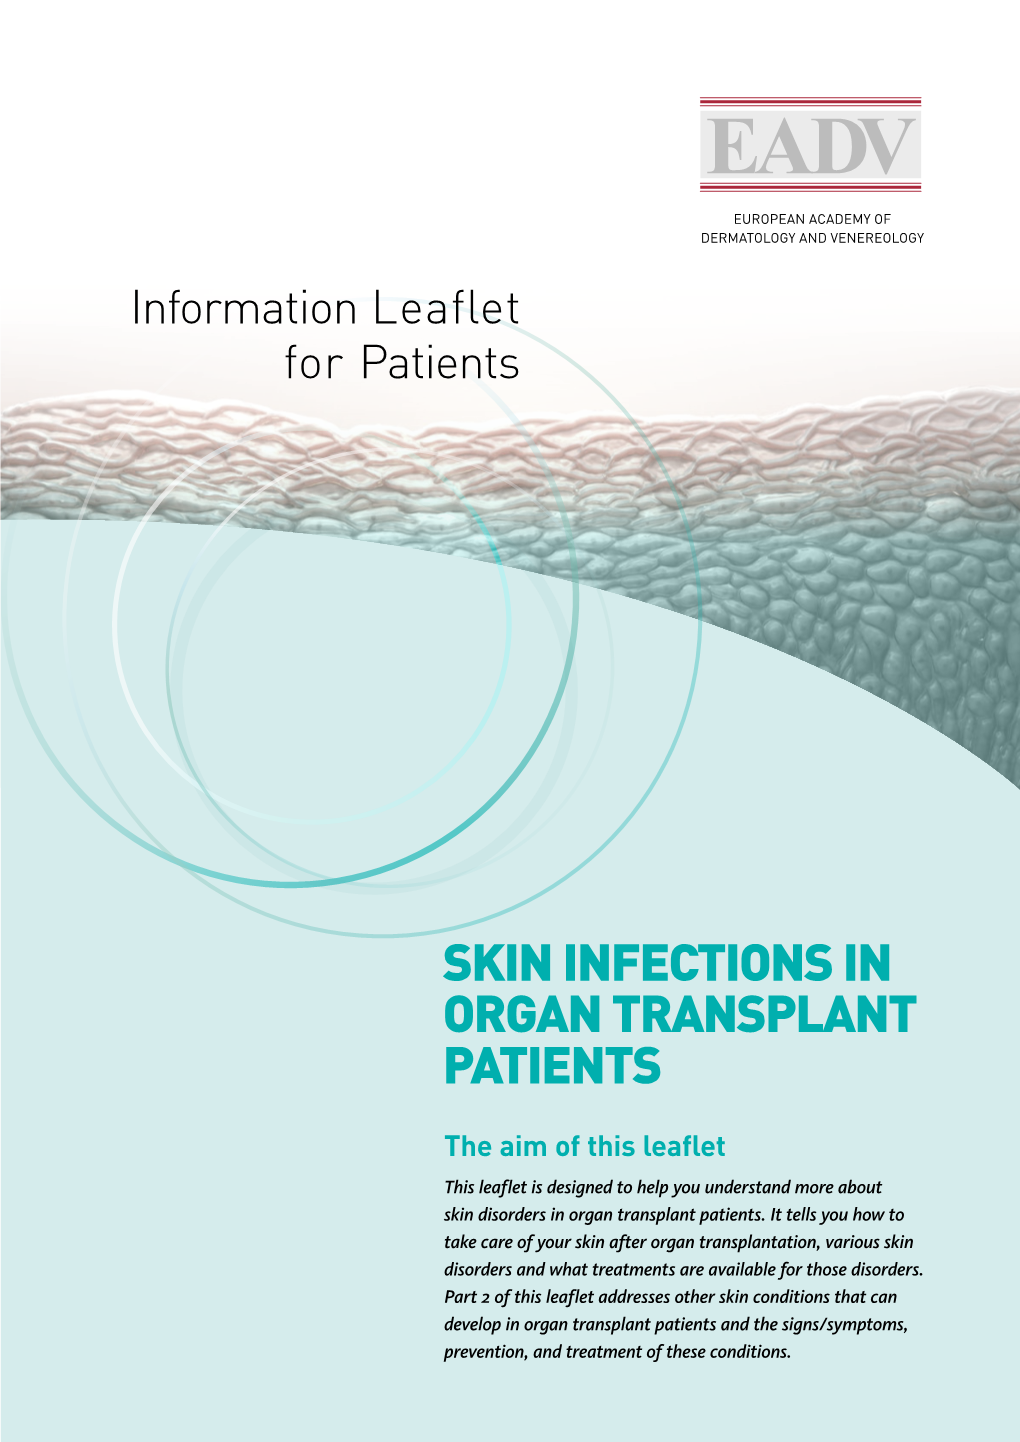 Skin Infections in Organ Transplant Patients